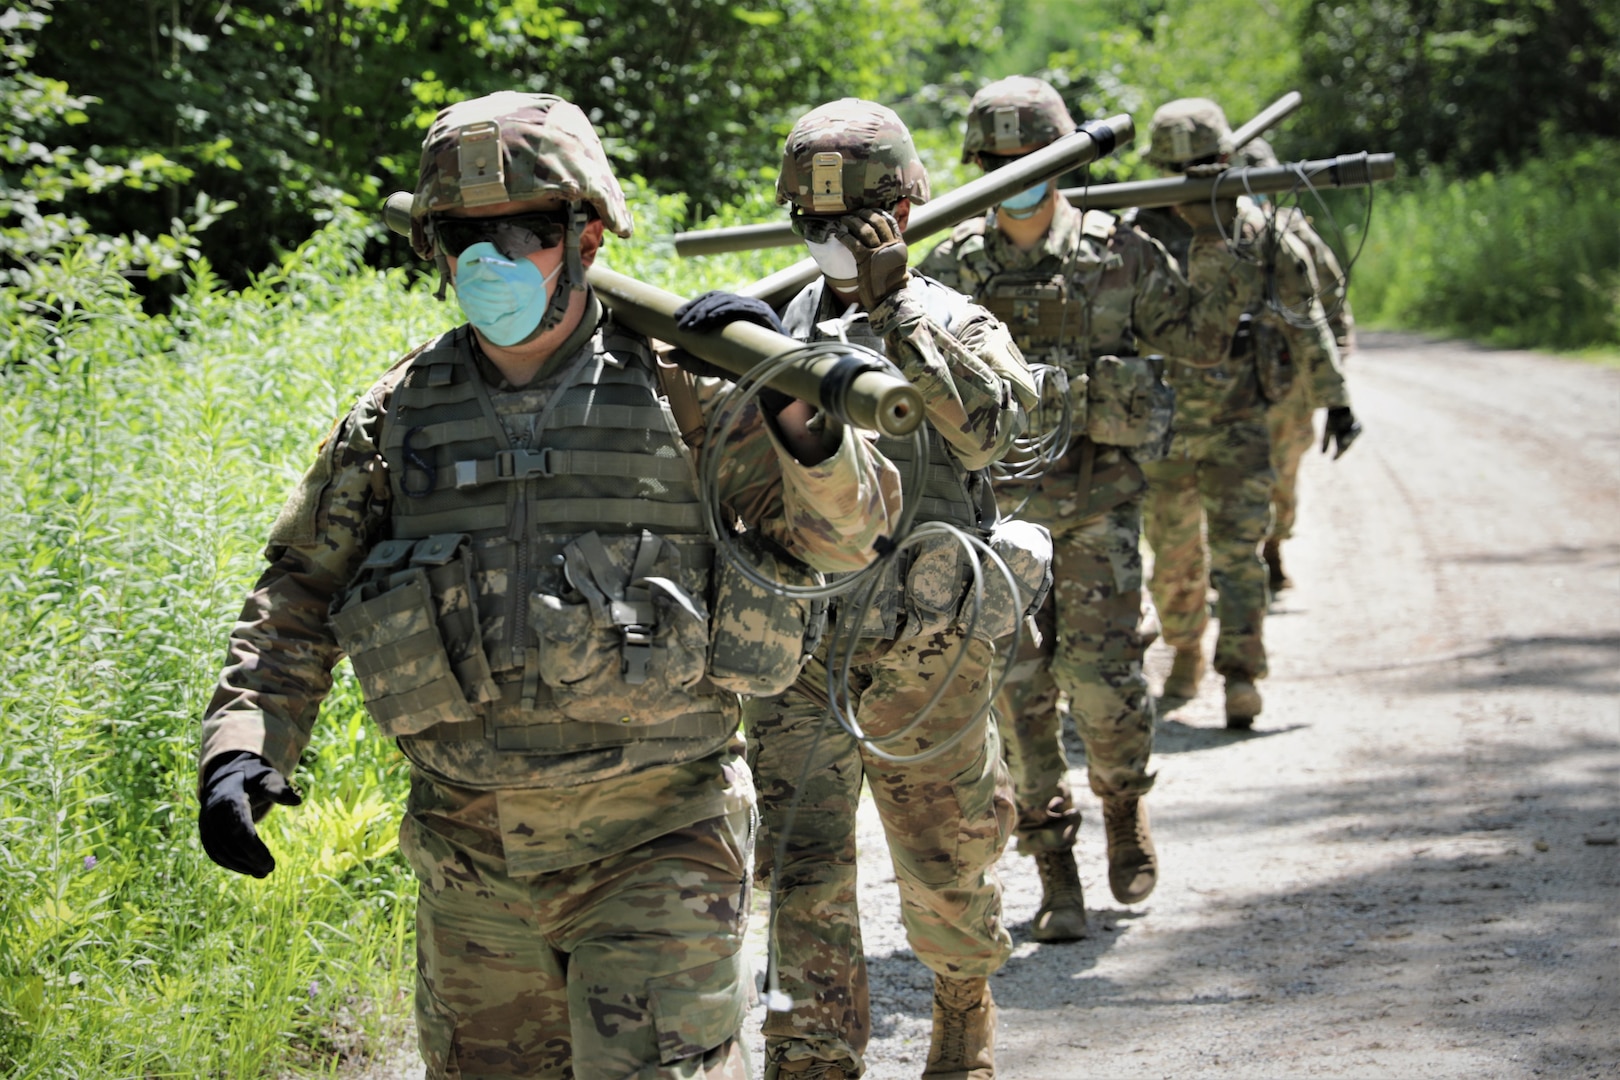 New York Army National Guard Soldiers assigned to Bravo Company, 152 Brigade Engineer Battalion conduct demolition training at Fort Drum, NY, Jul. 15.